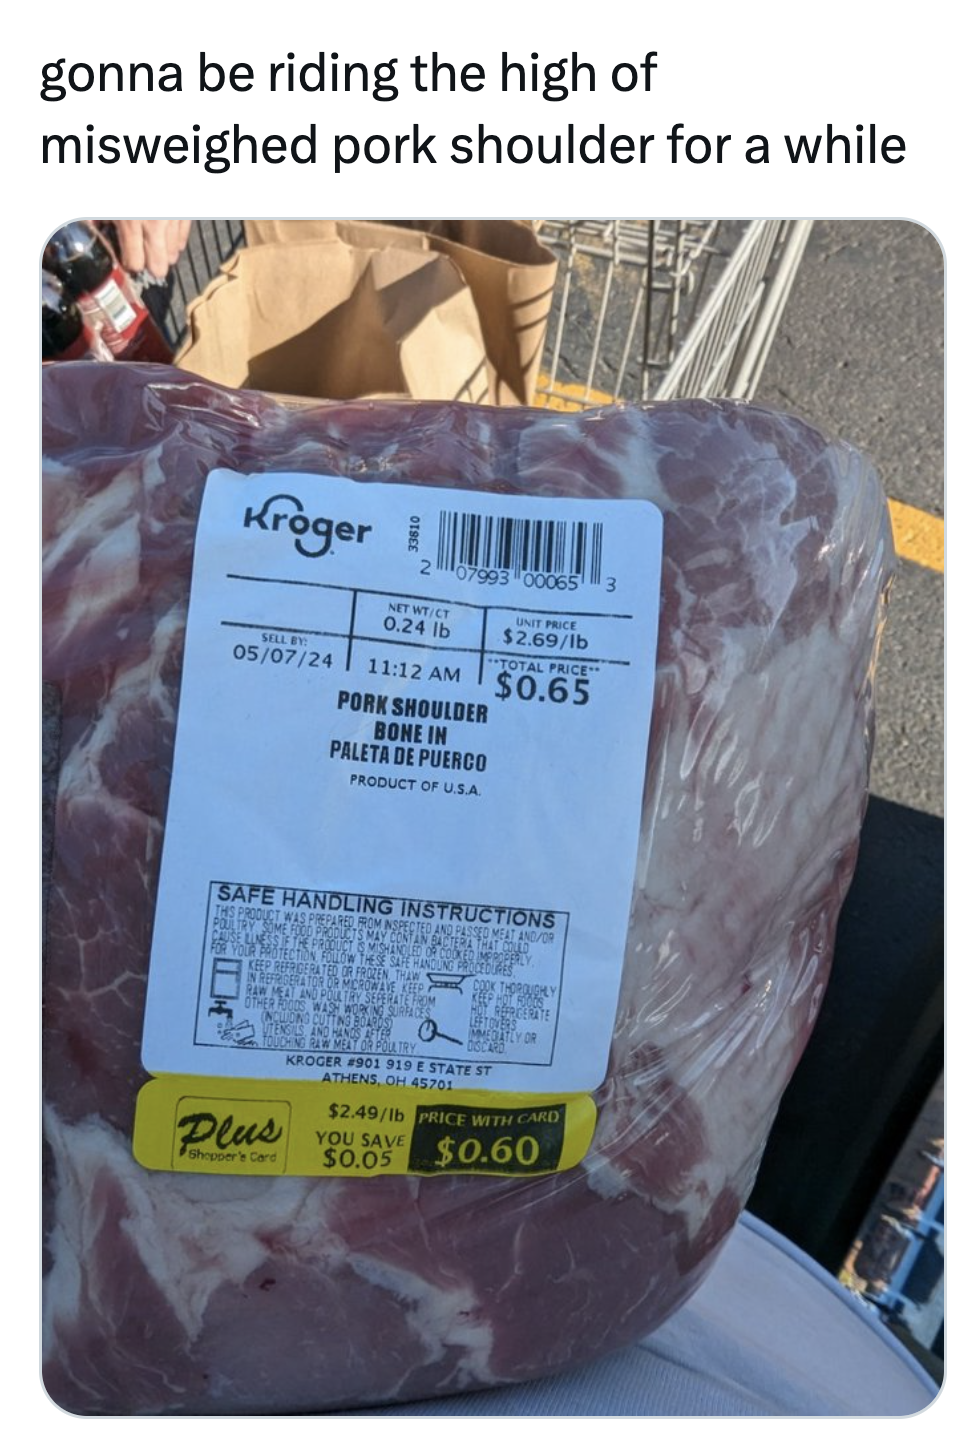 beef - gonna be riding the high of misweighed pork shoulder for a while Kroger i 050724 0.24 $2.69ib Total Pric $0.65 Pork Shoulder Bone In Paleta De Puenco Product Of Usa Safe Handling Instructions Plus Gerburetates Athene Haspel $2.40h pics With Care Yo